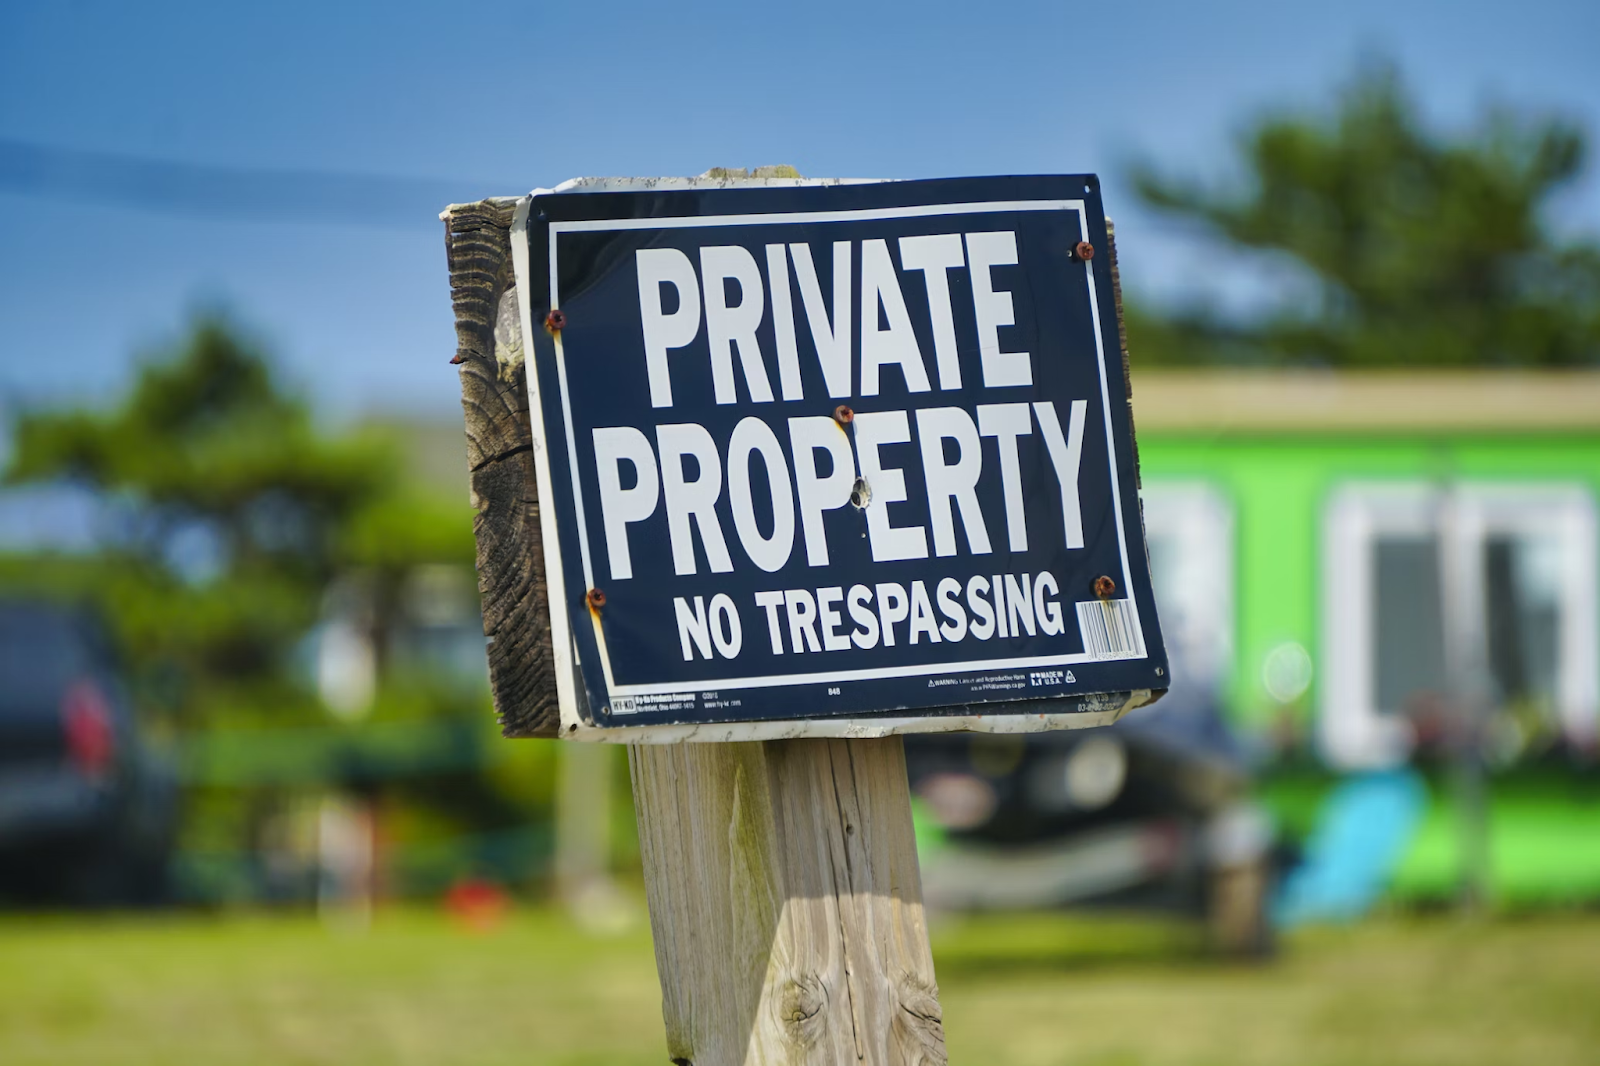 Trespassing laws in the UK